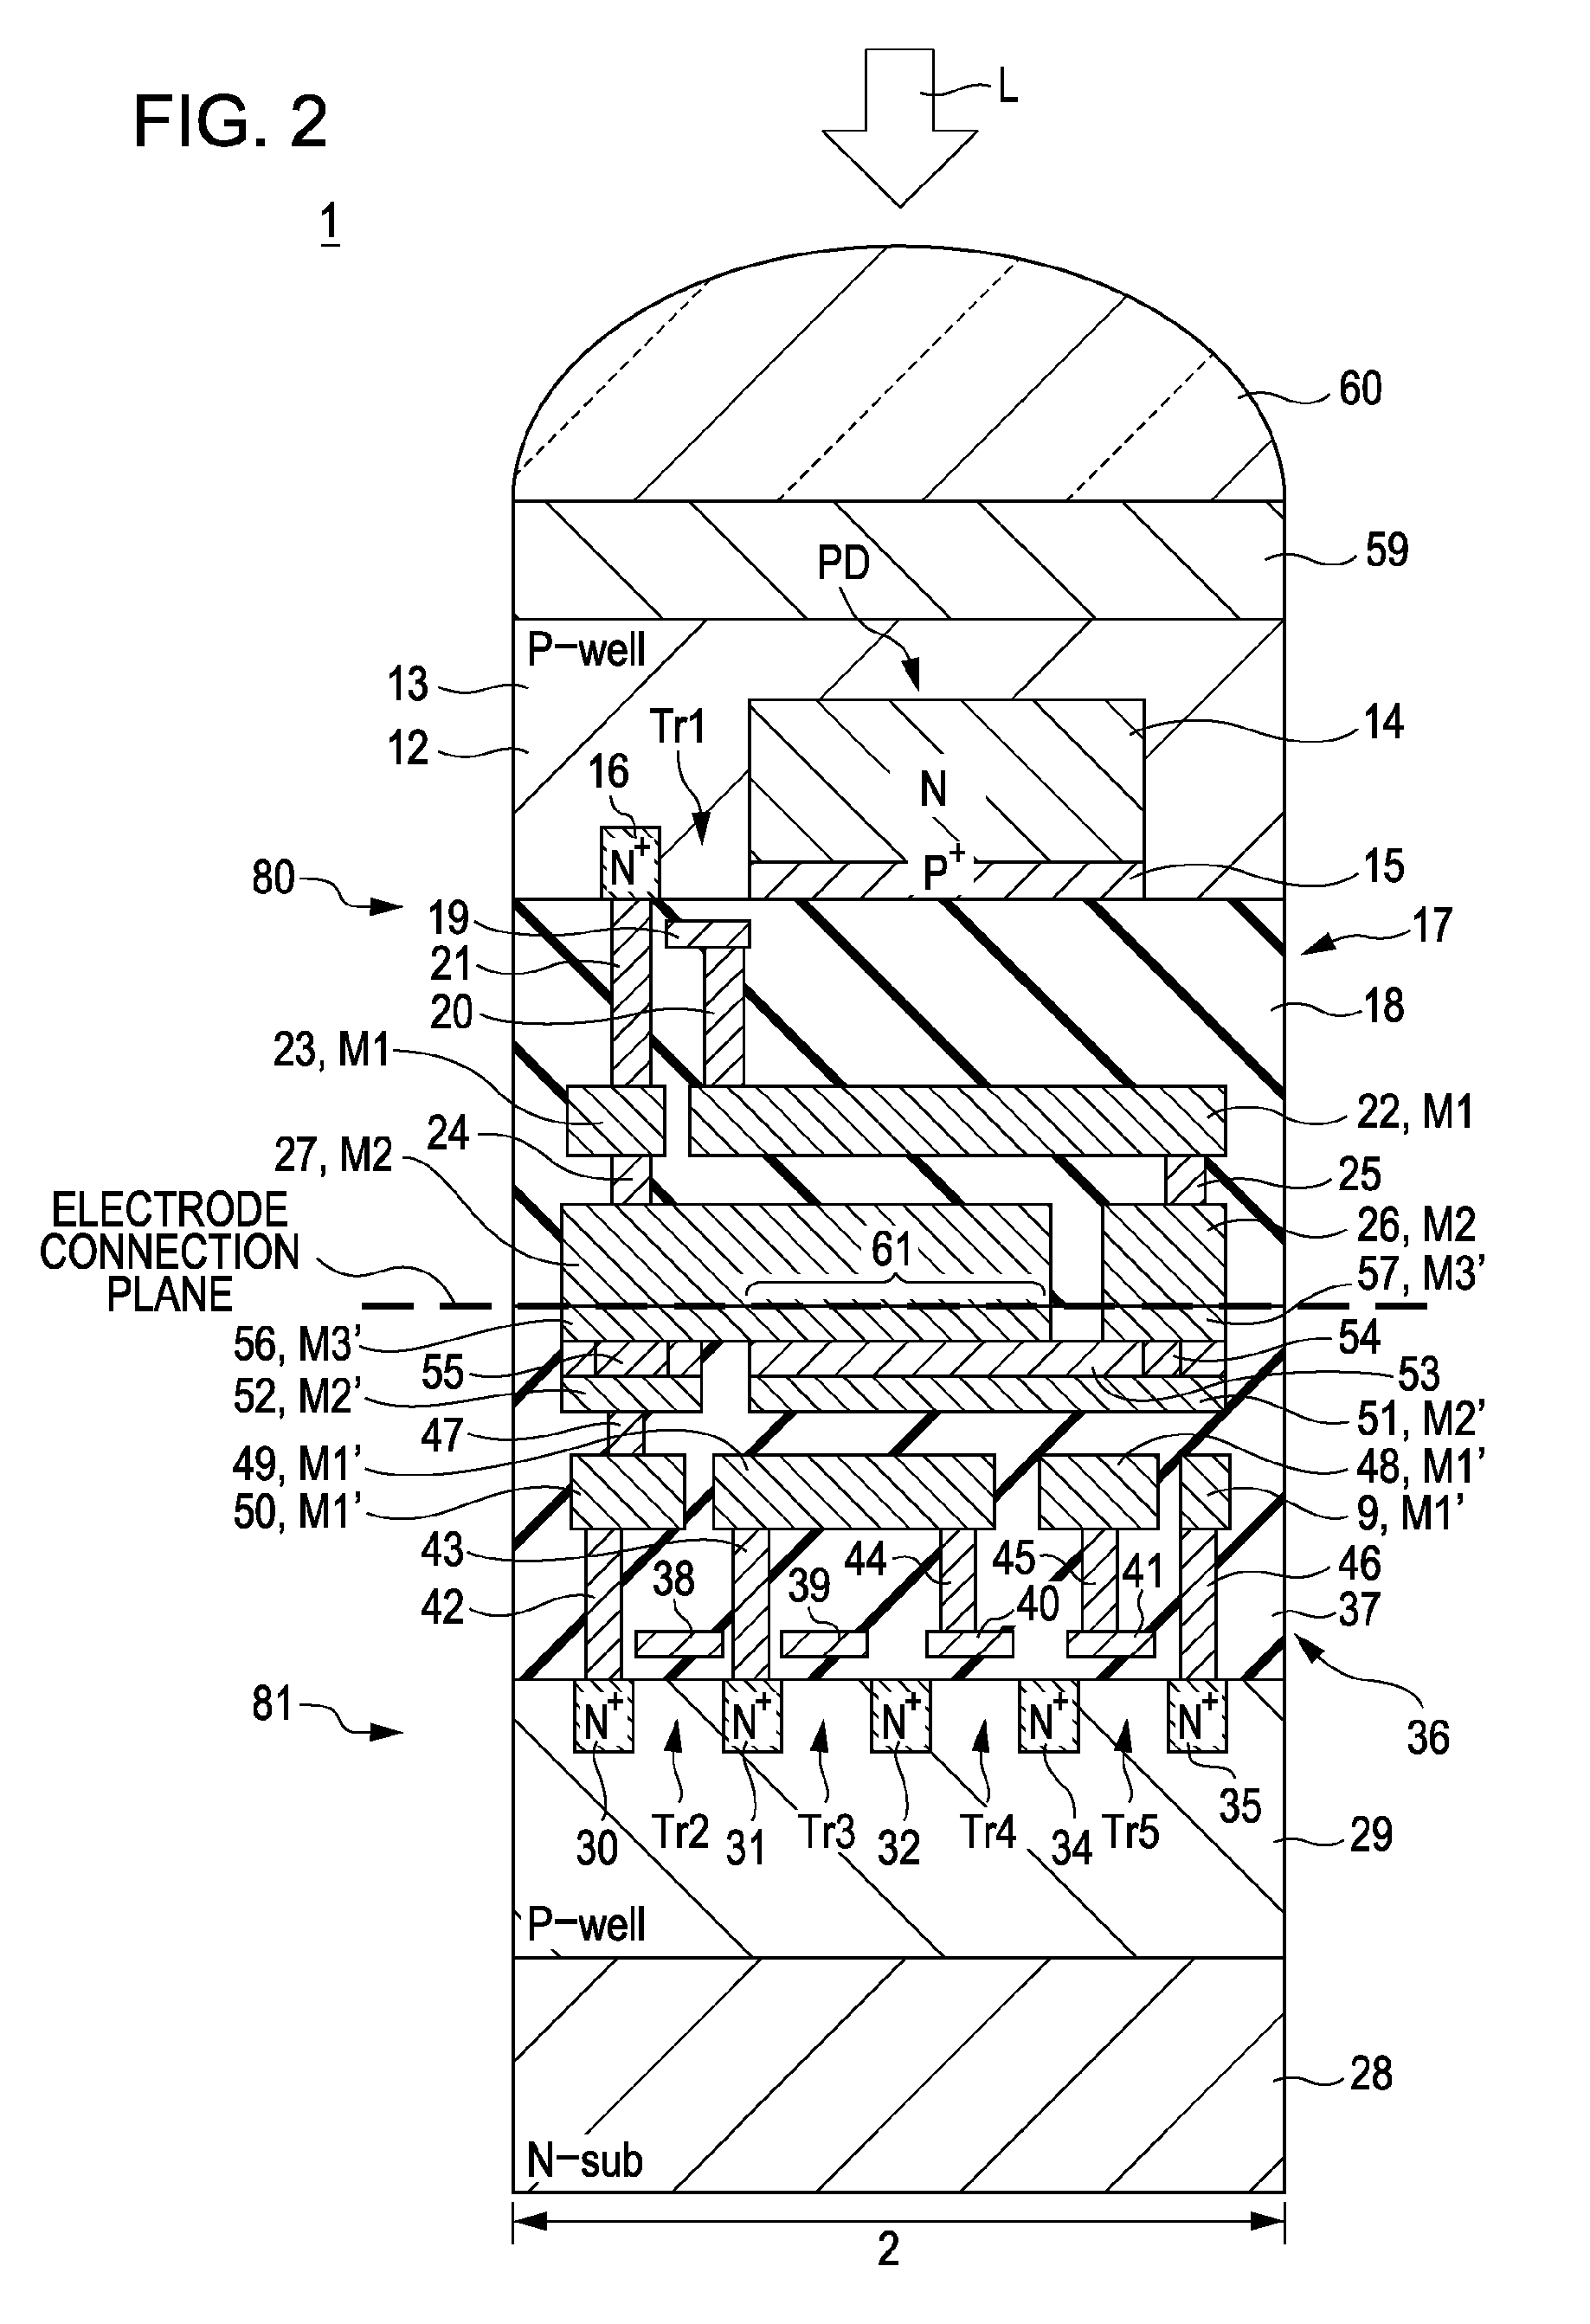 Solid-state imaging device with charge transfer transistor on different substrates